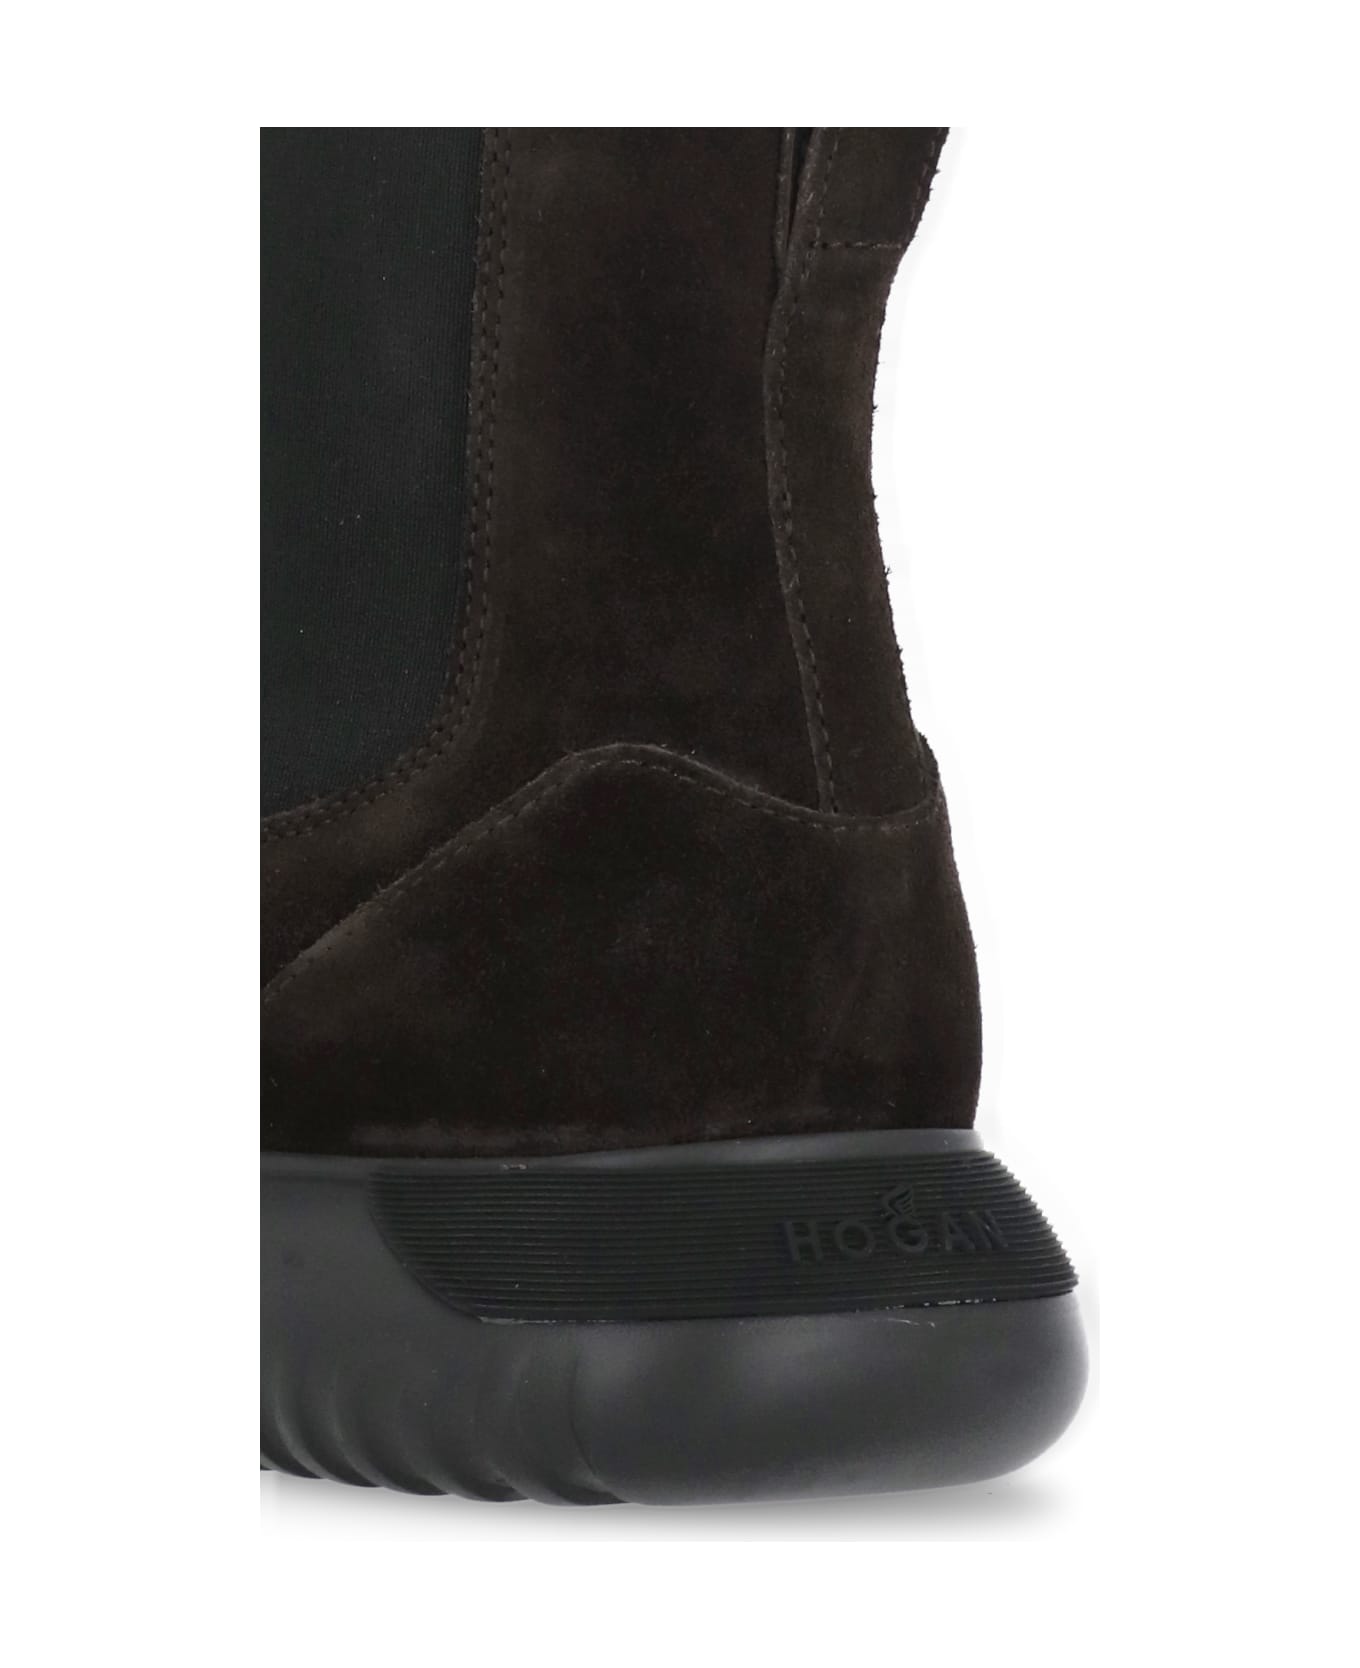 Hogan Round Toe Ankle Boots - Brown ブーツ